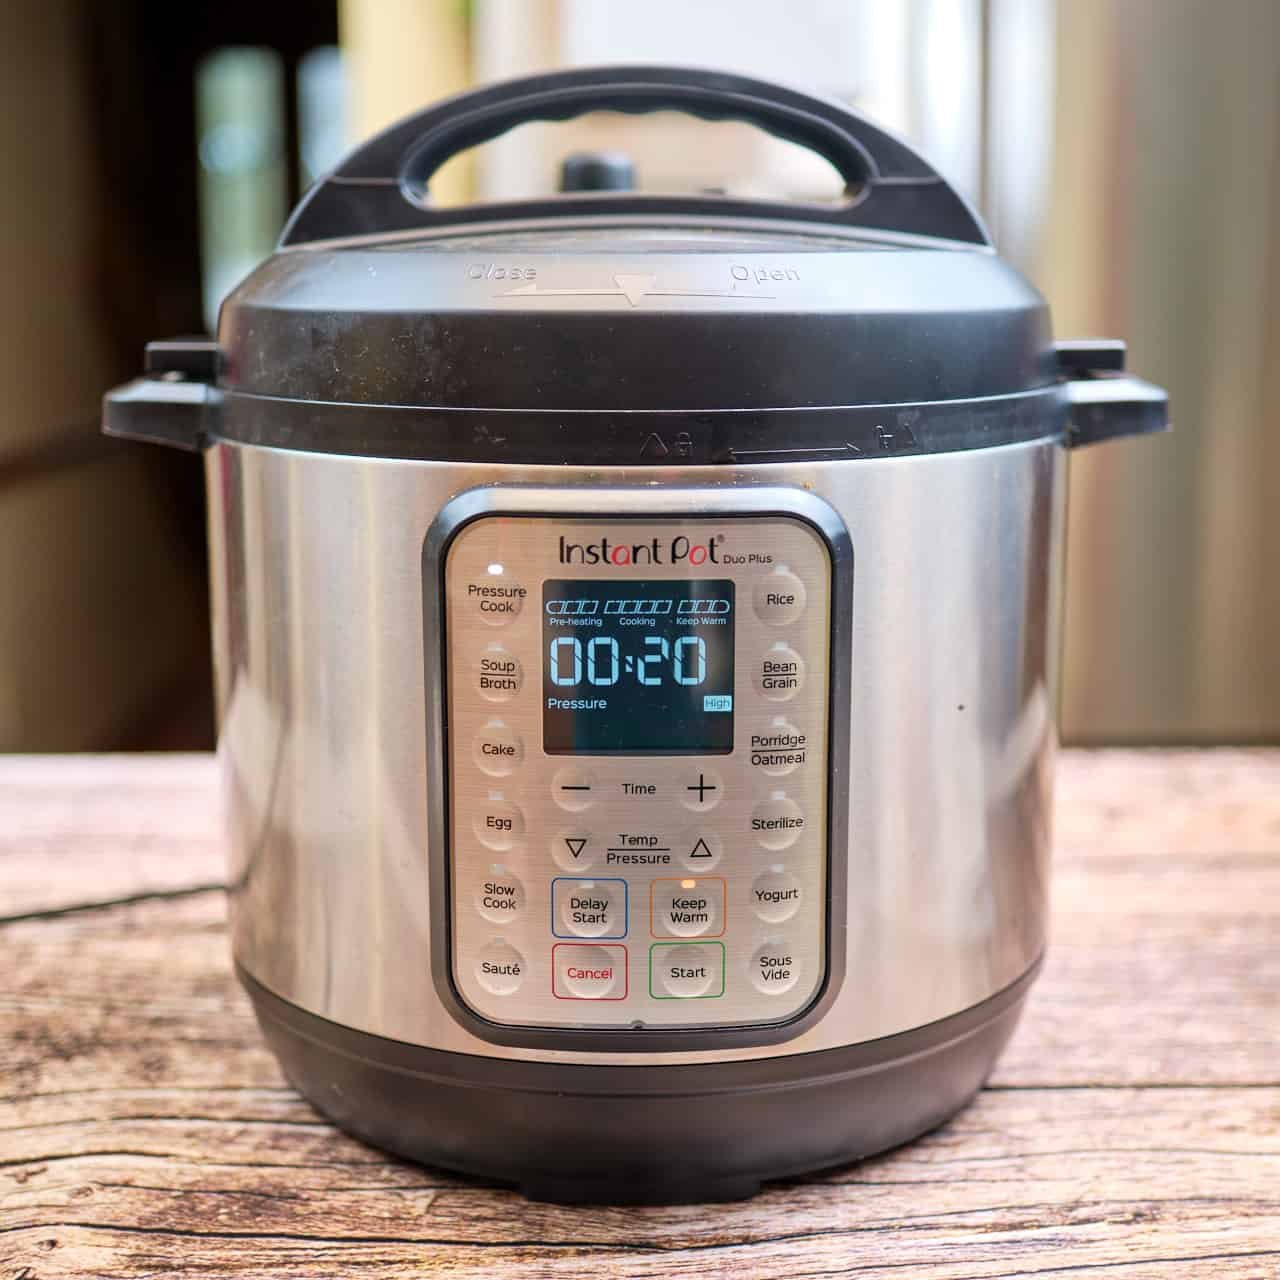 Instant Pot set to pressure cook on high for 20 minutes